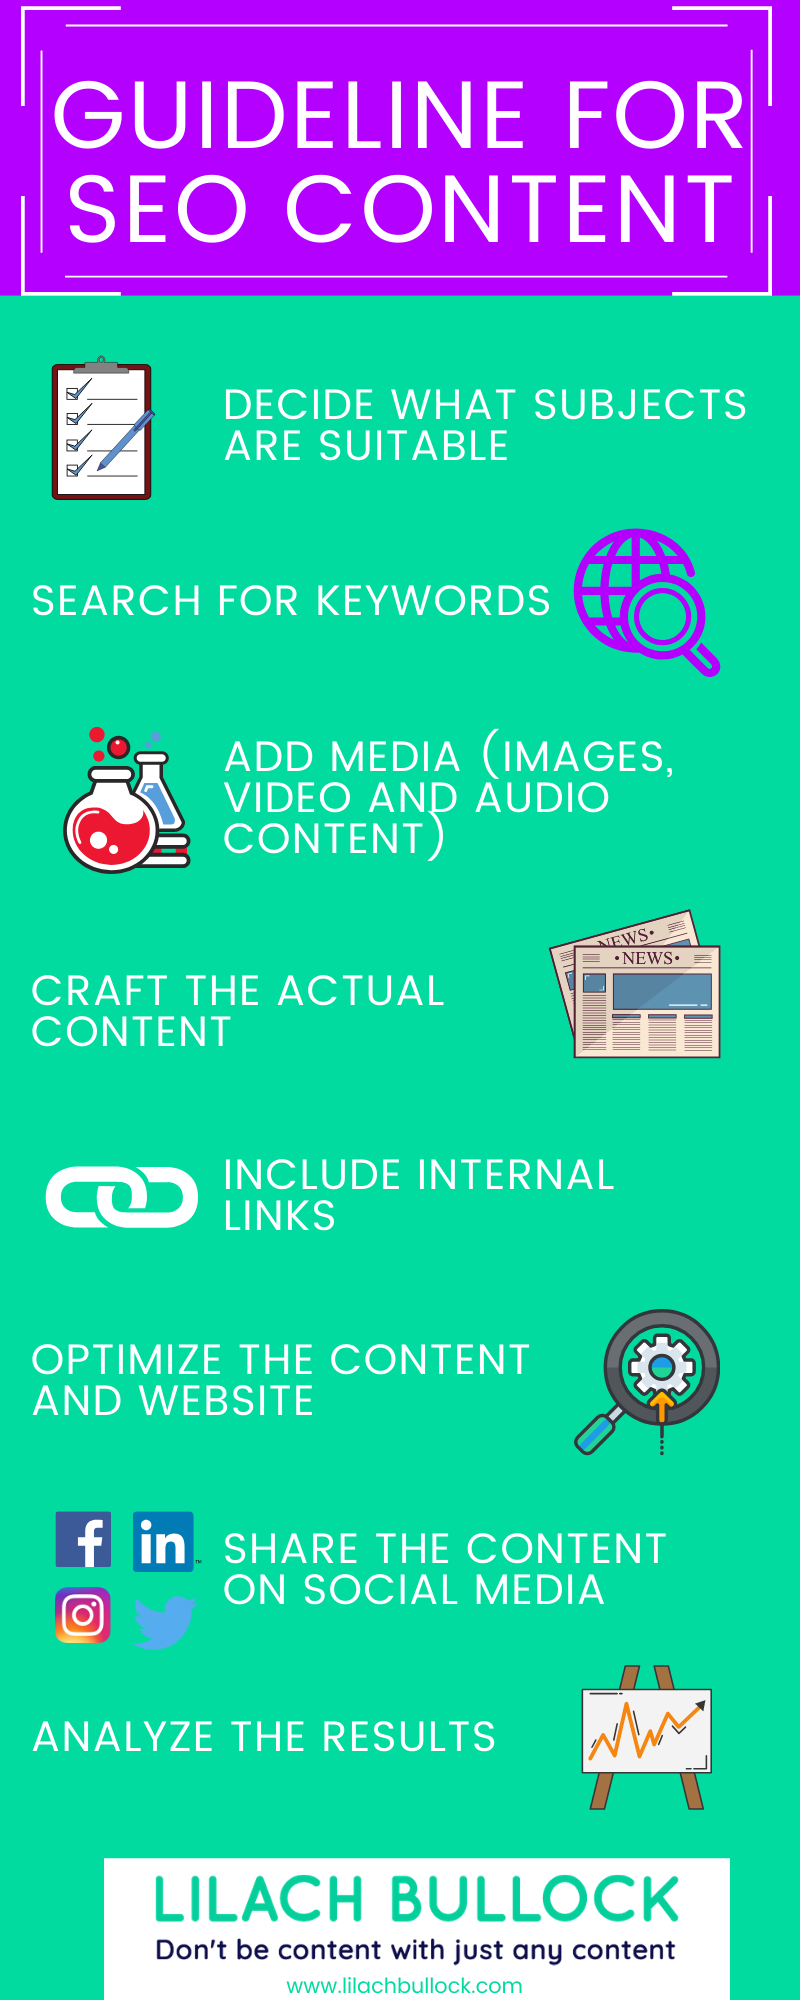 guideline for seo content 